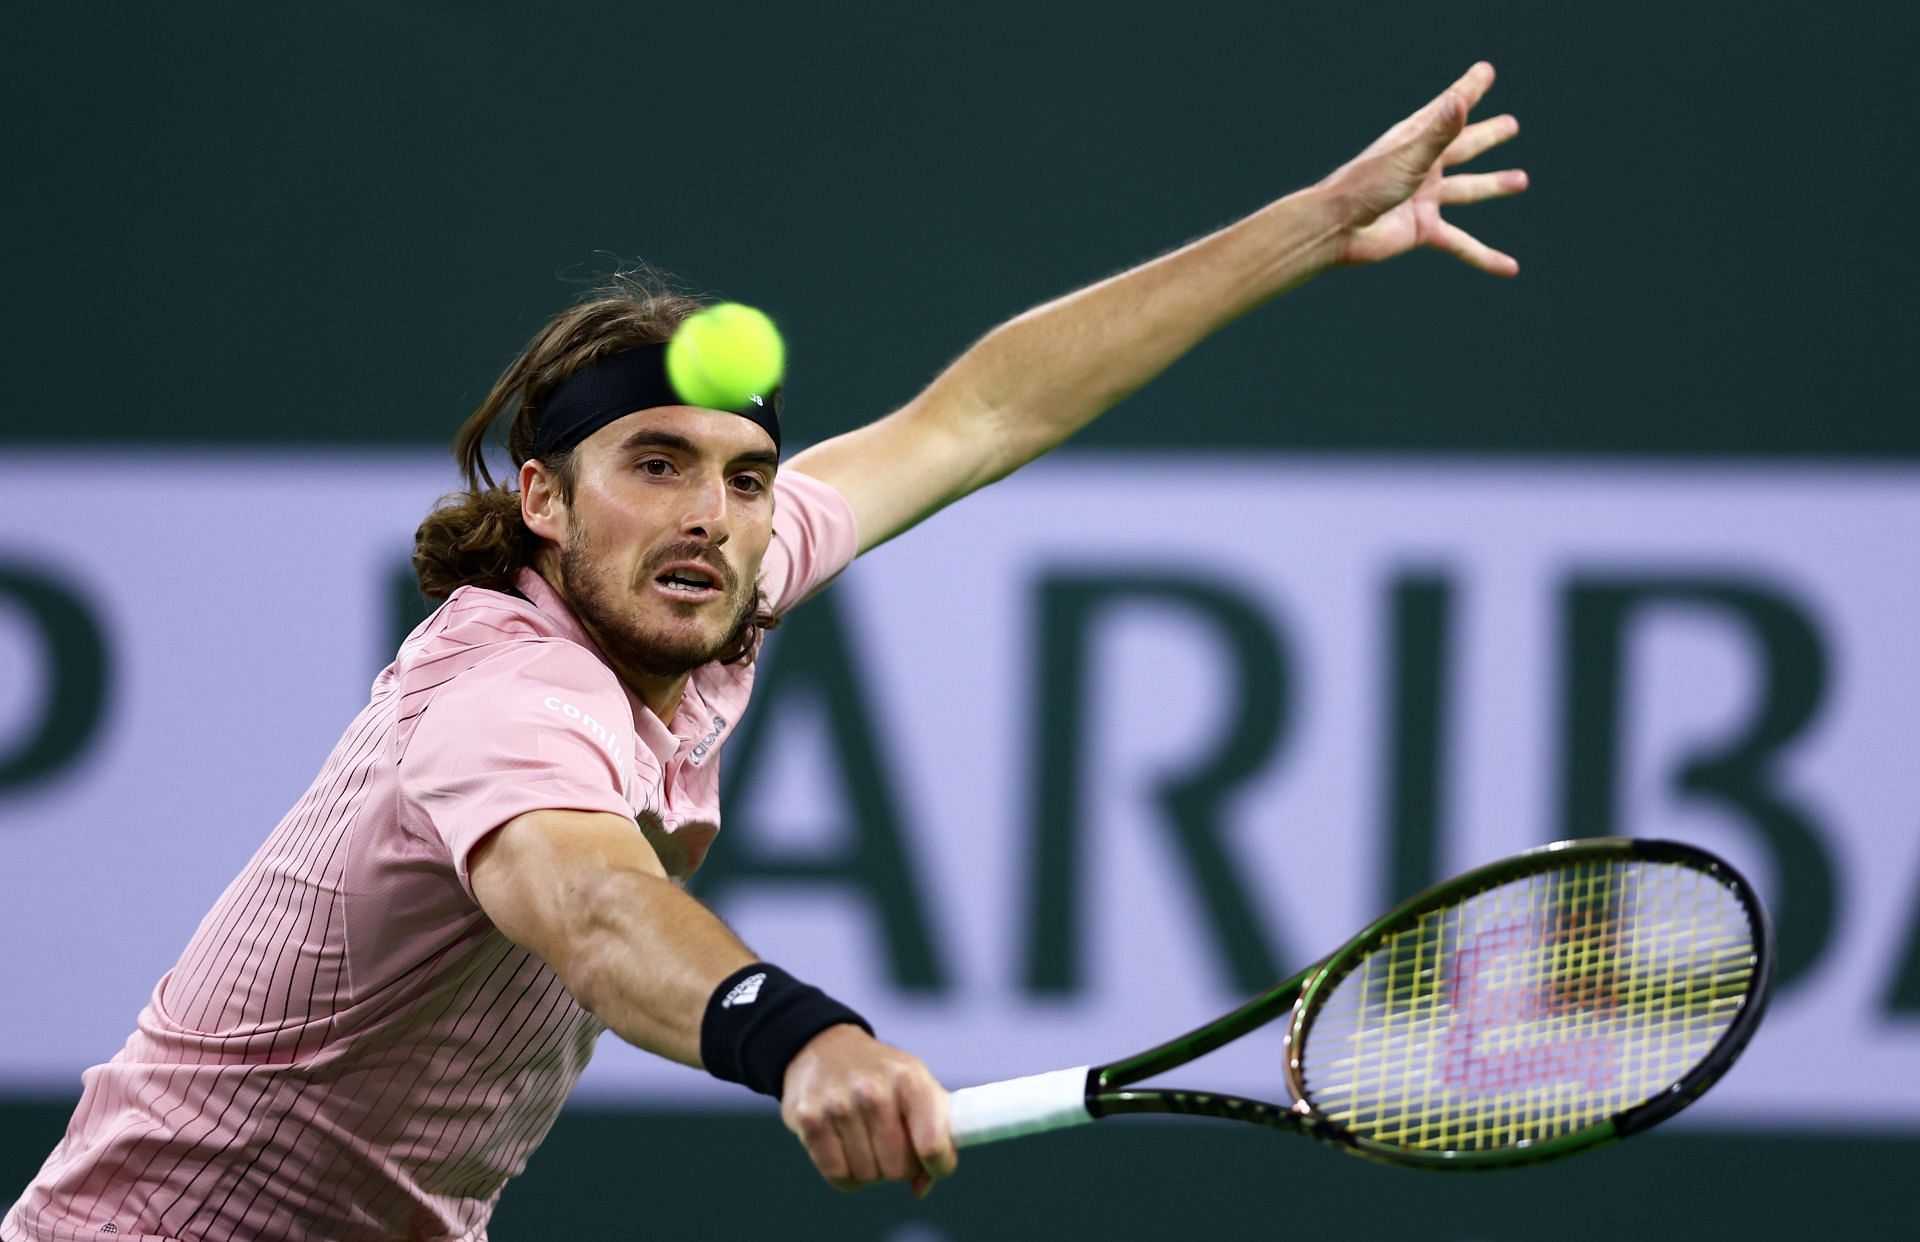 Stefanos Tsitsipas at the 2022 Indian Wells Masters